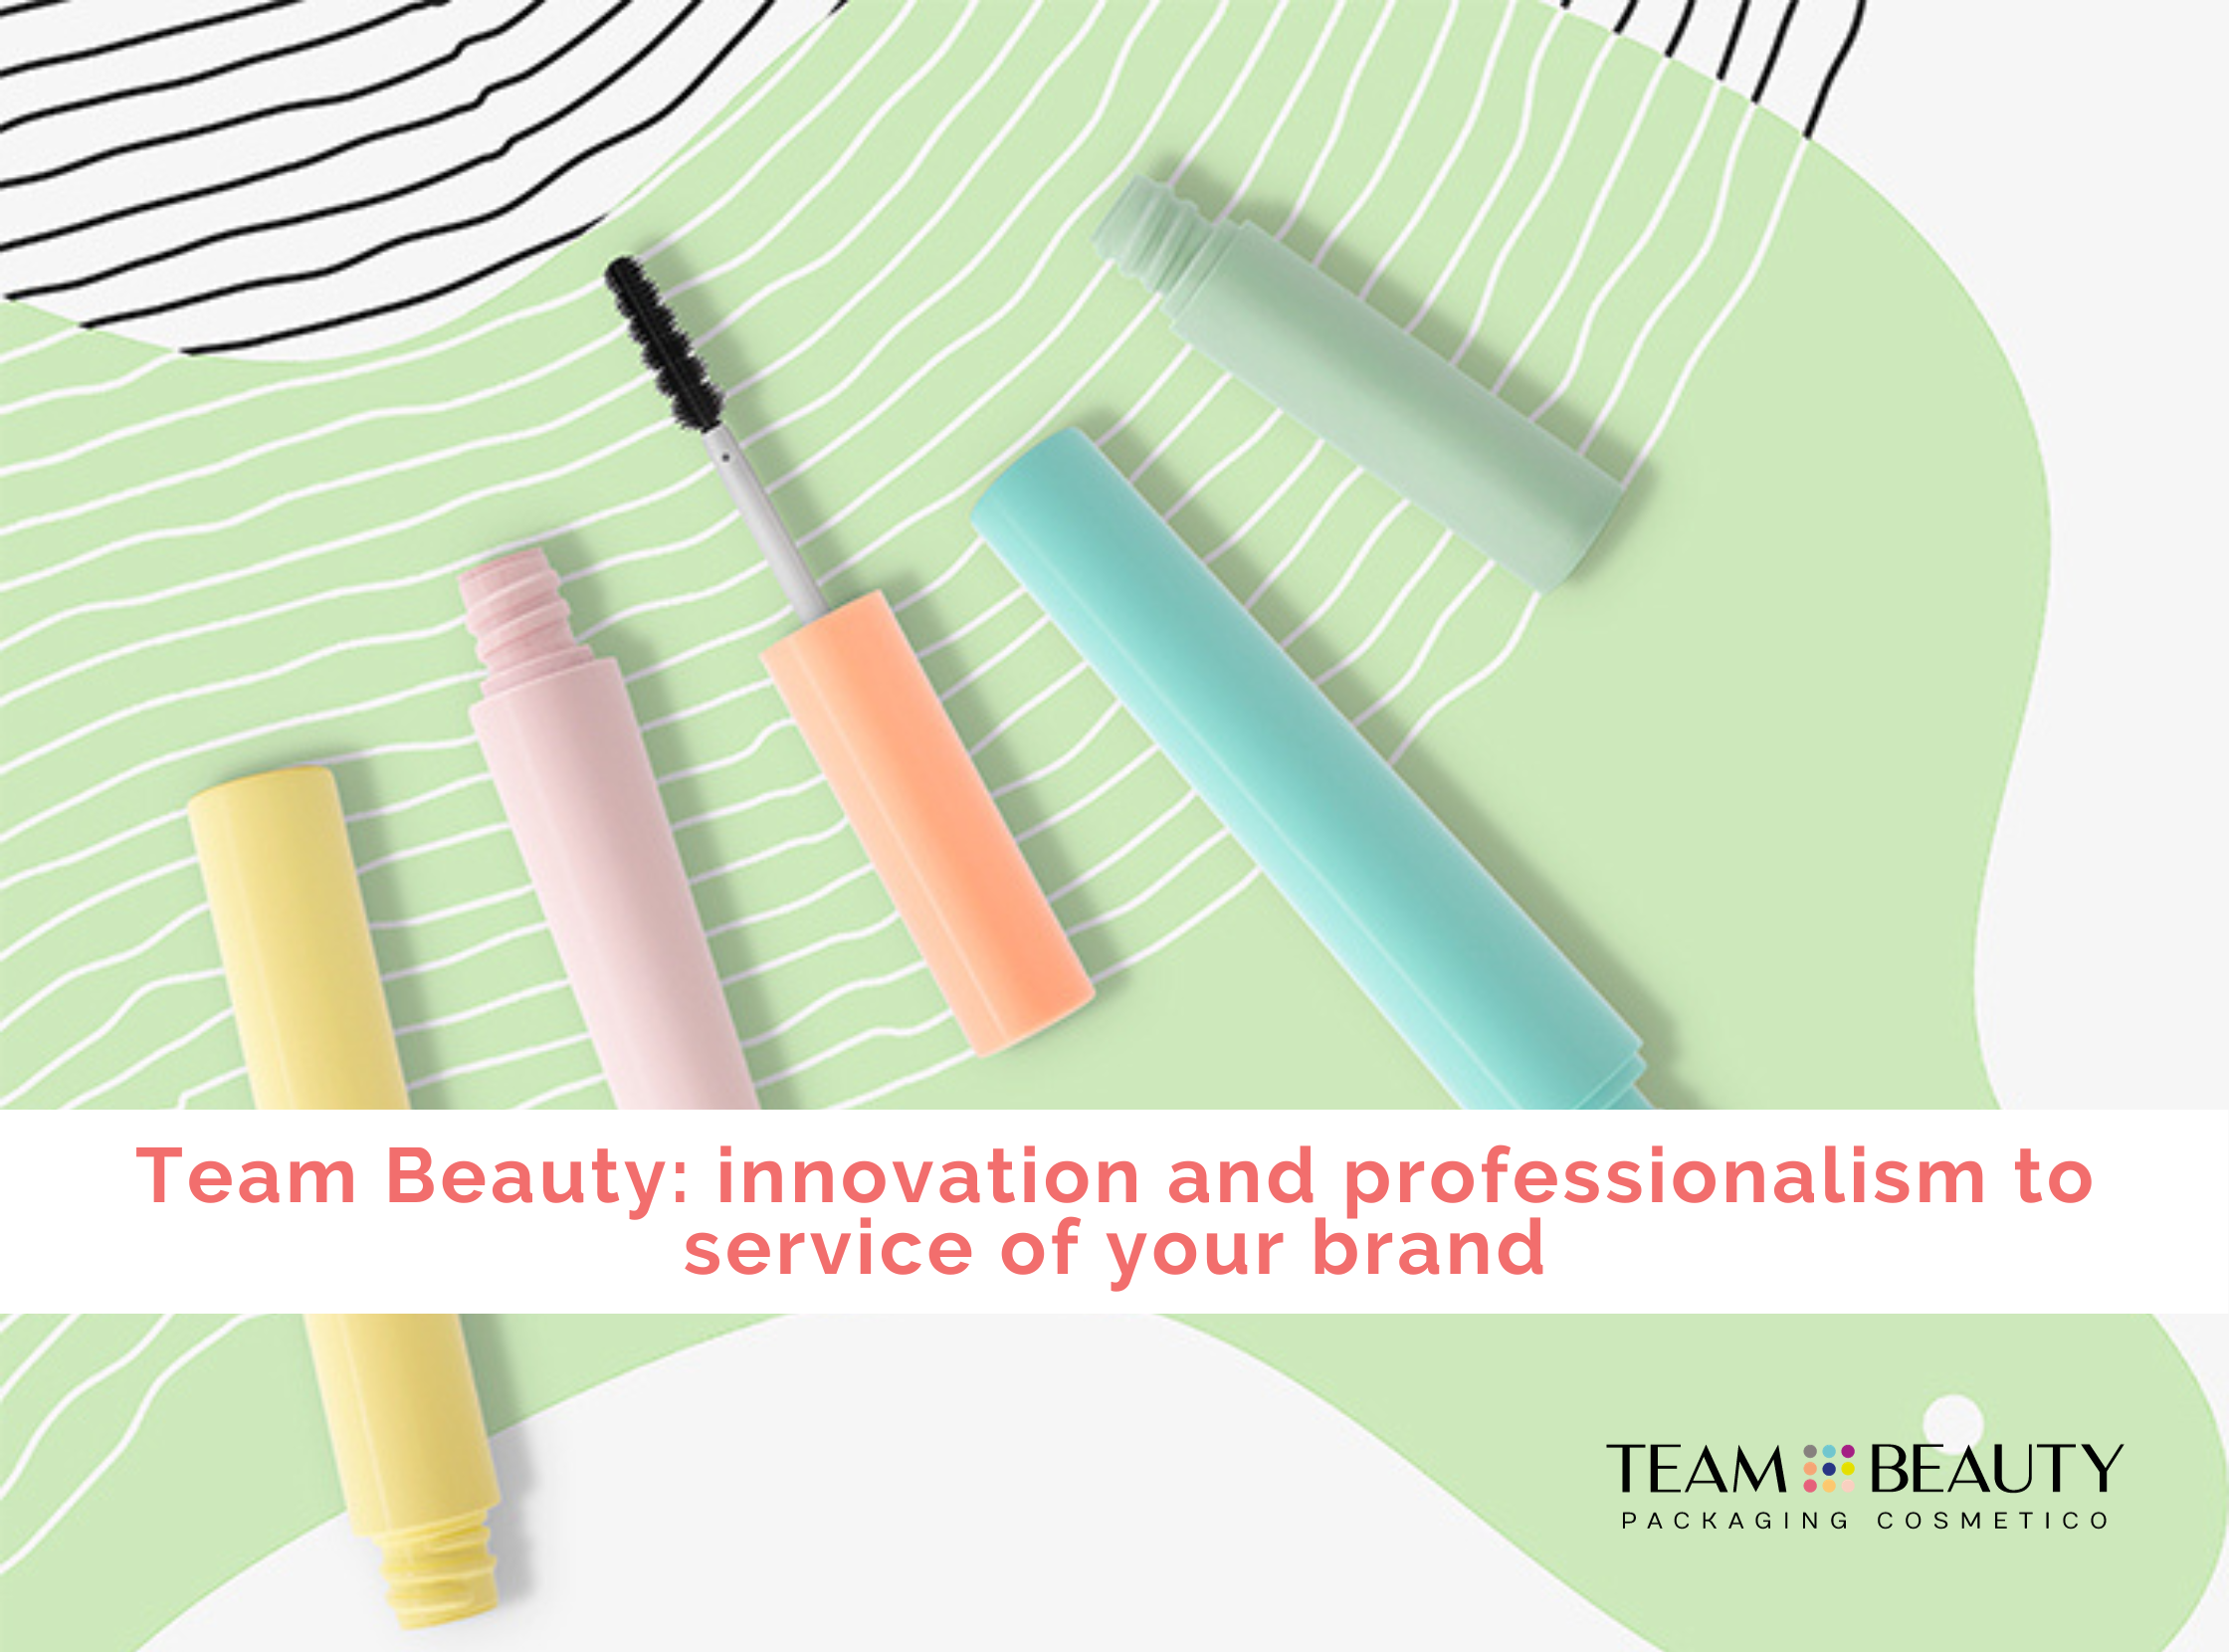 Team Beauty: innovation and professionalism to service of your brand